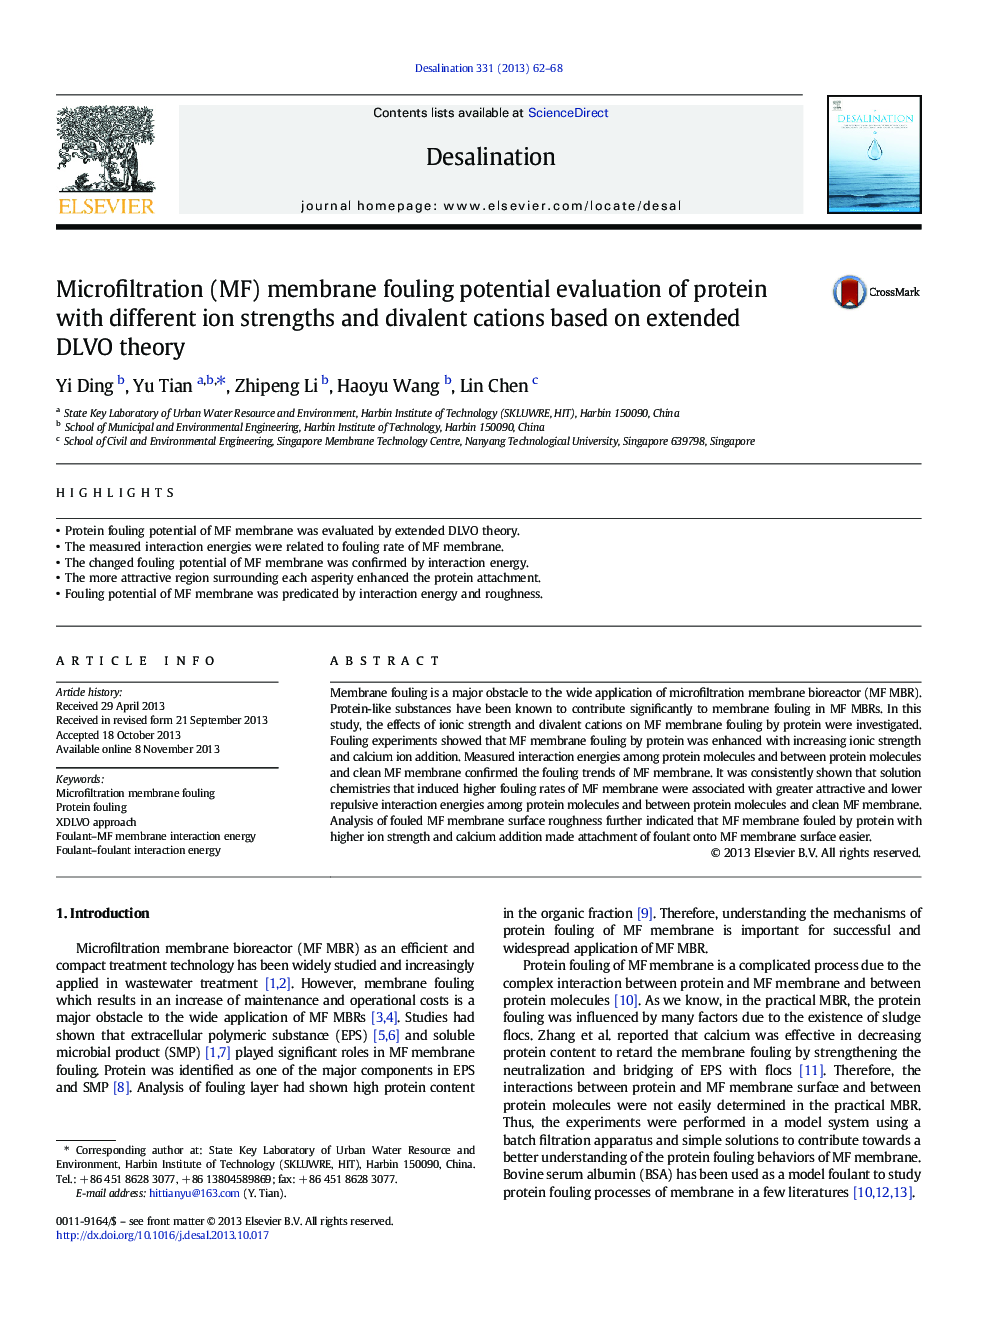 Microfiltration (MF) membrane fouling potential evaluation of protein with different ion strengths and divalent cations based on extended DLVO theory